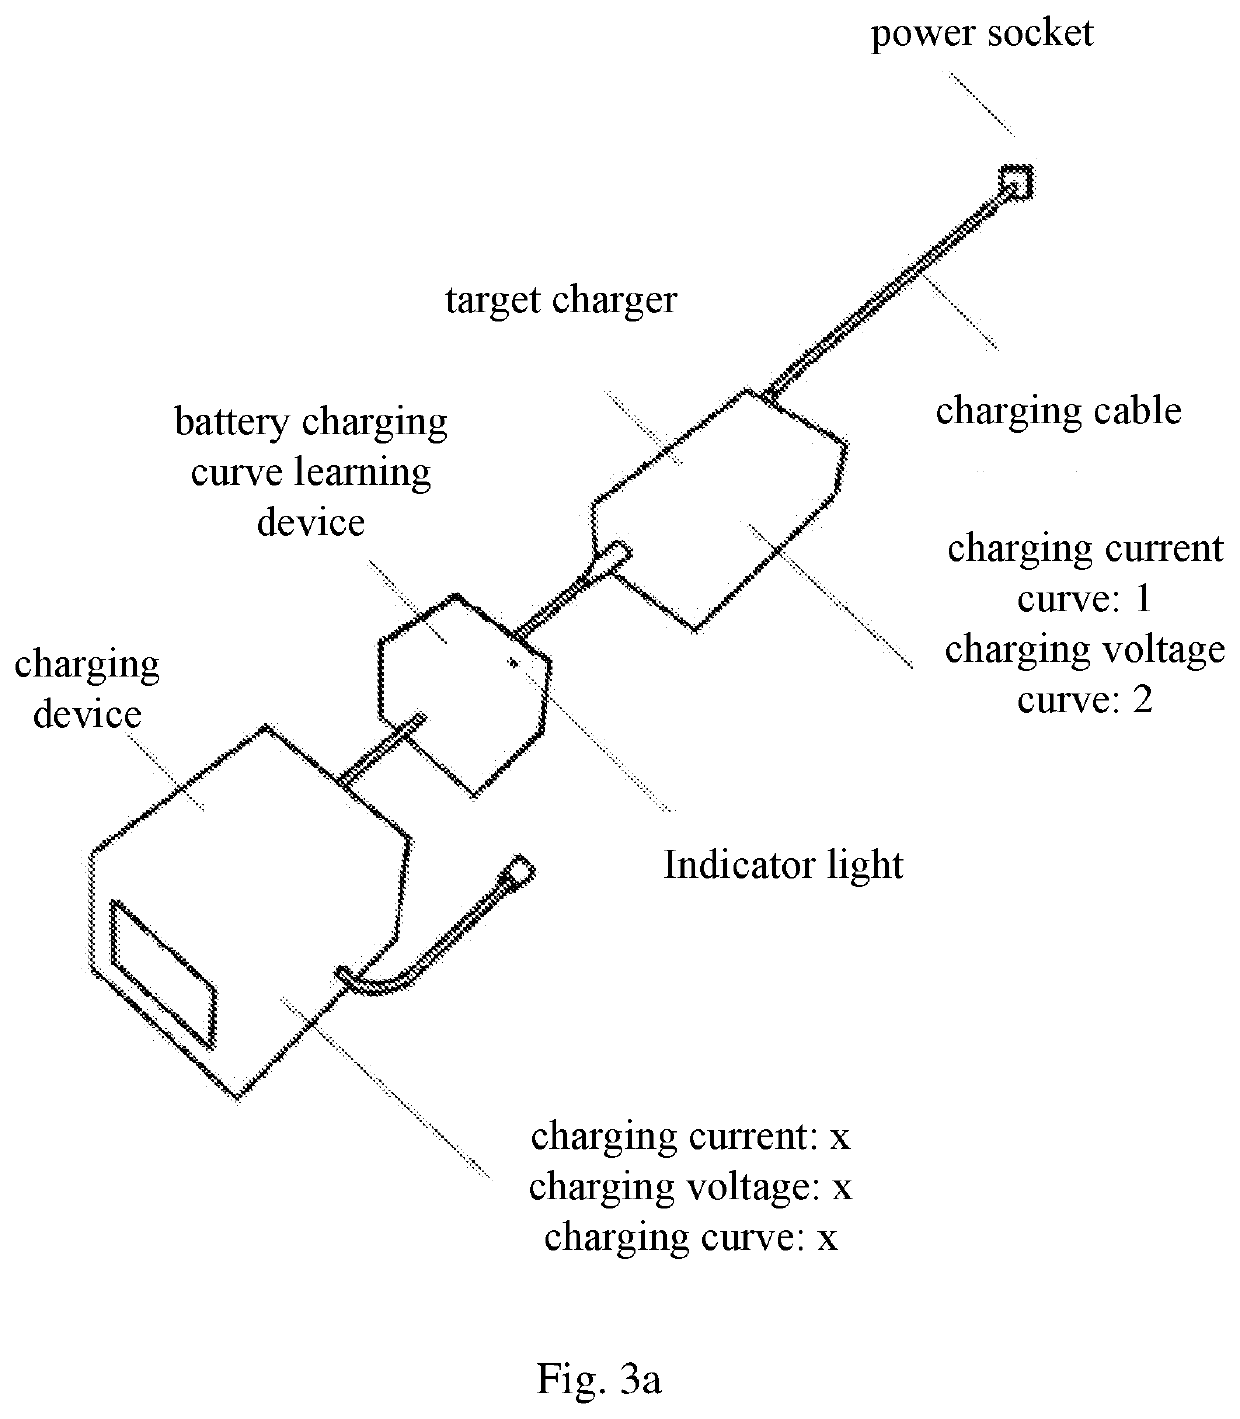 Battery charging curve learning device and charger